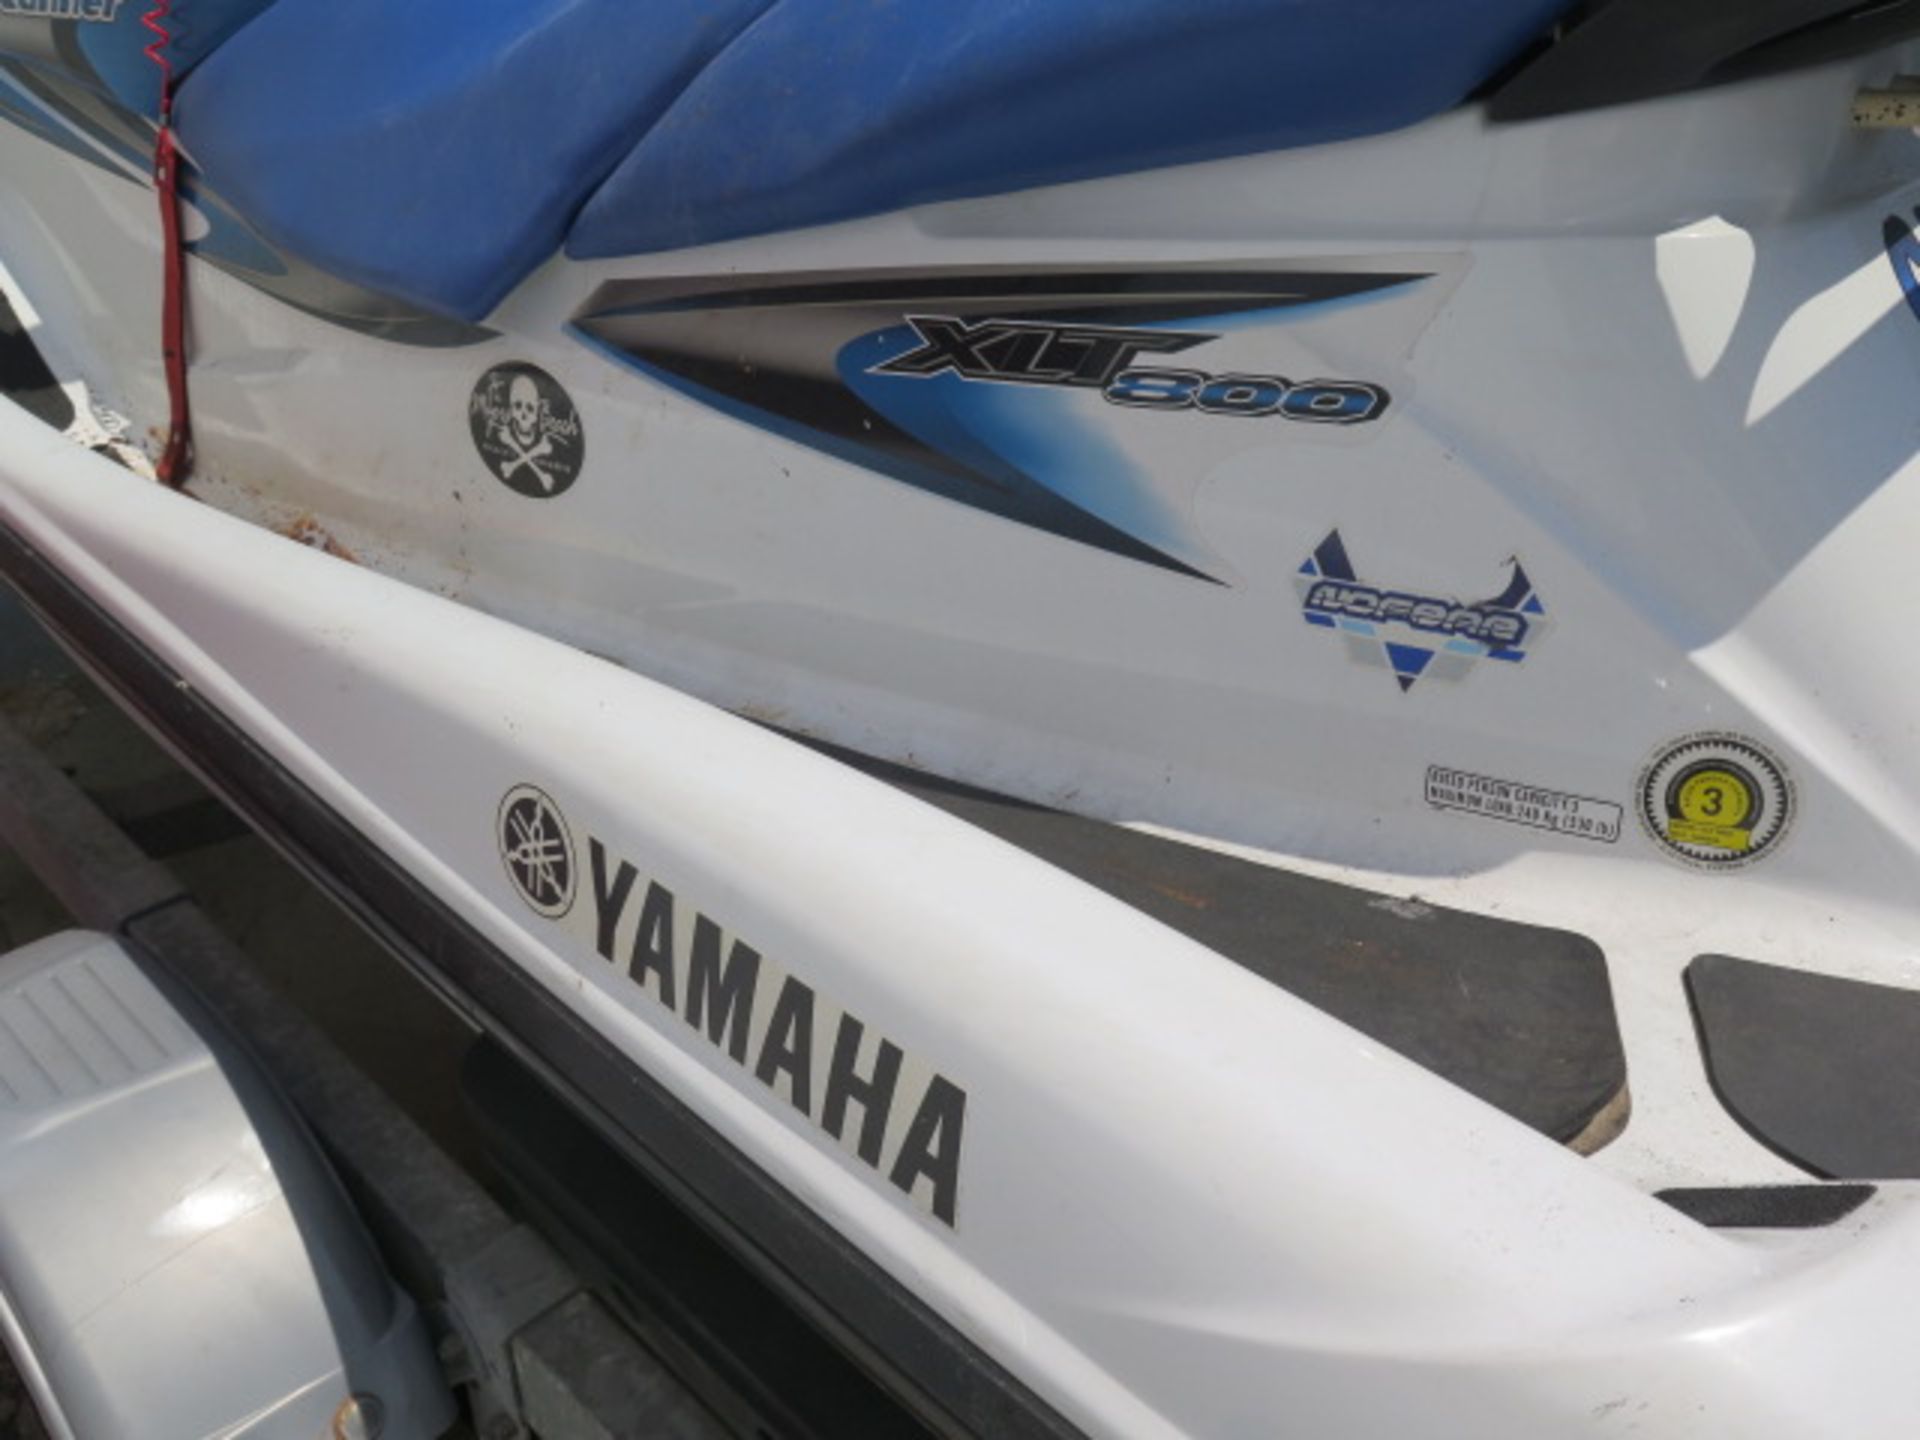 2004 Yamaha XLT800 Wave Runner Personal Watercraft w/ Gas Engine, Jet Outdrive, Trailer, SOLD AS IS - Image 8 of 15